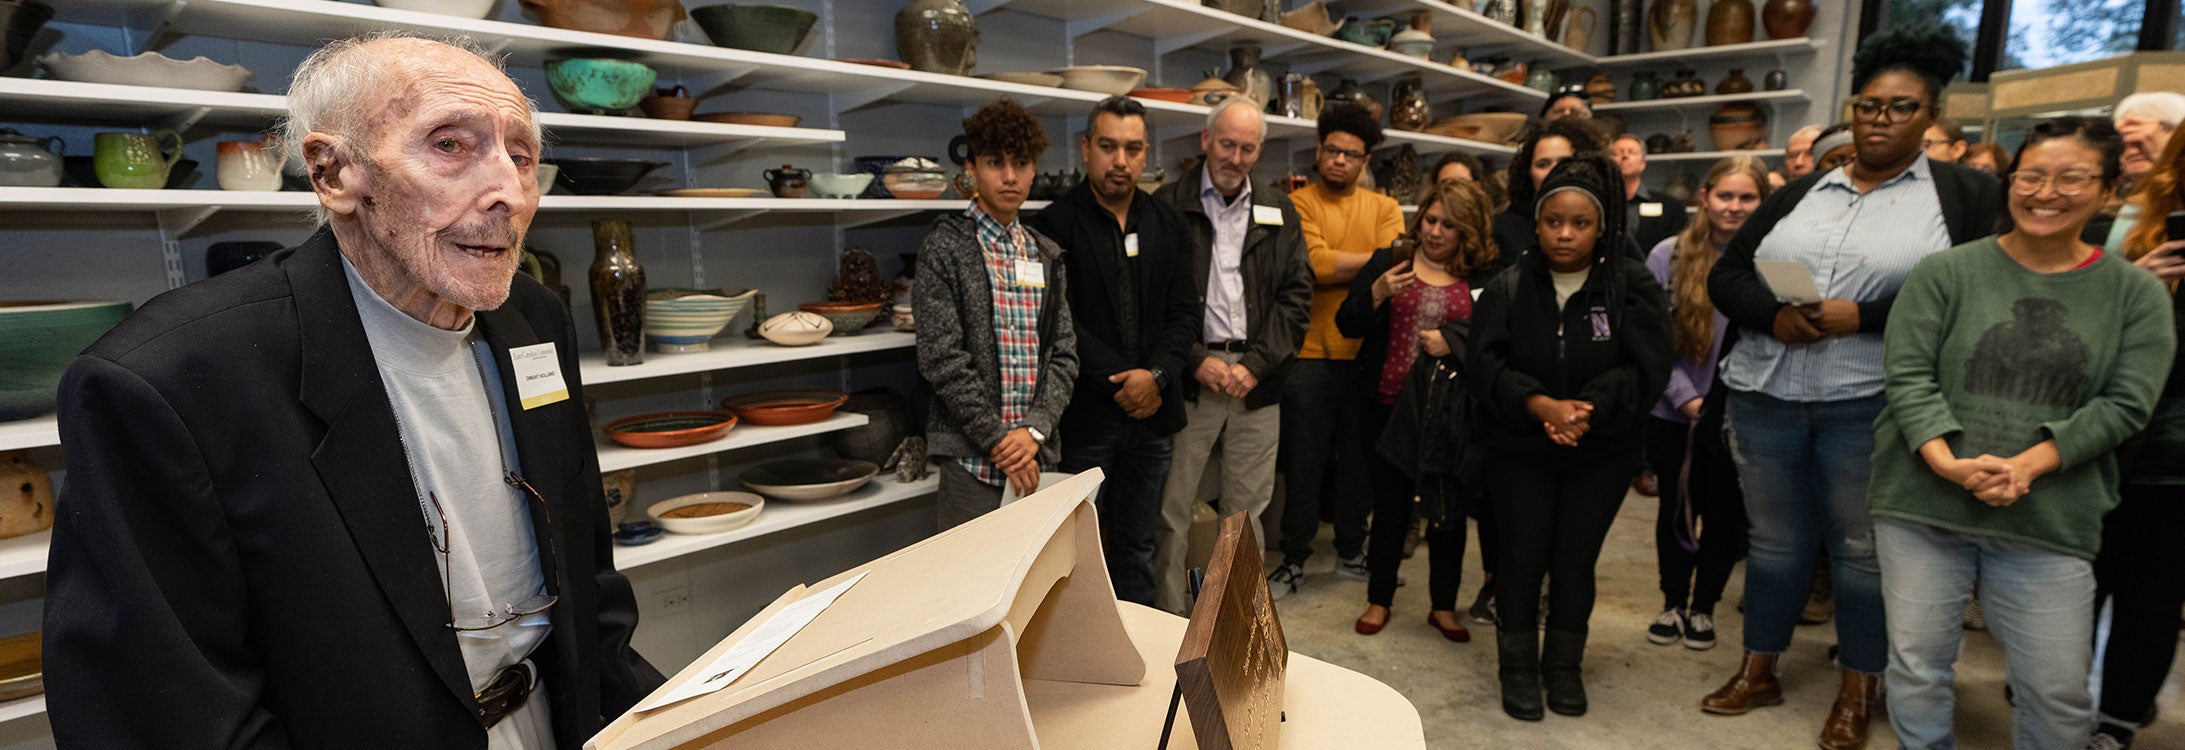 On Nov. 14, the School of Art and Design celebrated the opening of the newly-named Dwight M. Holland Ceramics Classroom where Holland’s pieces will be housed. (Photos by Cliff Hollis)